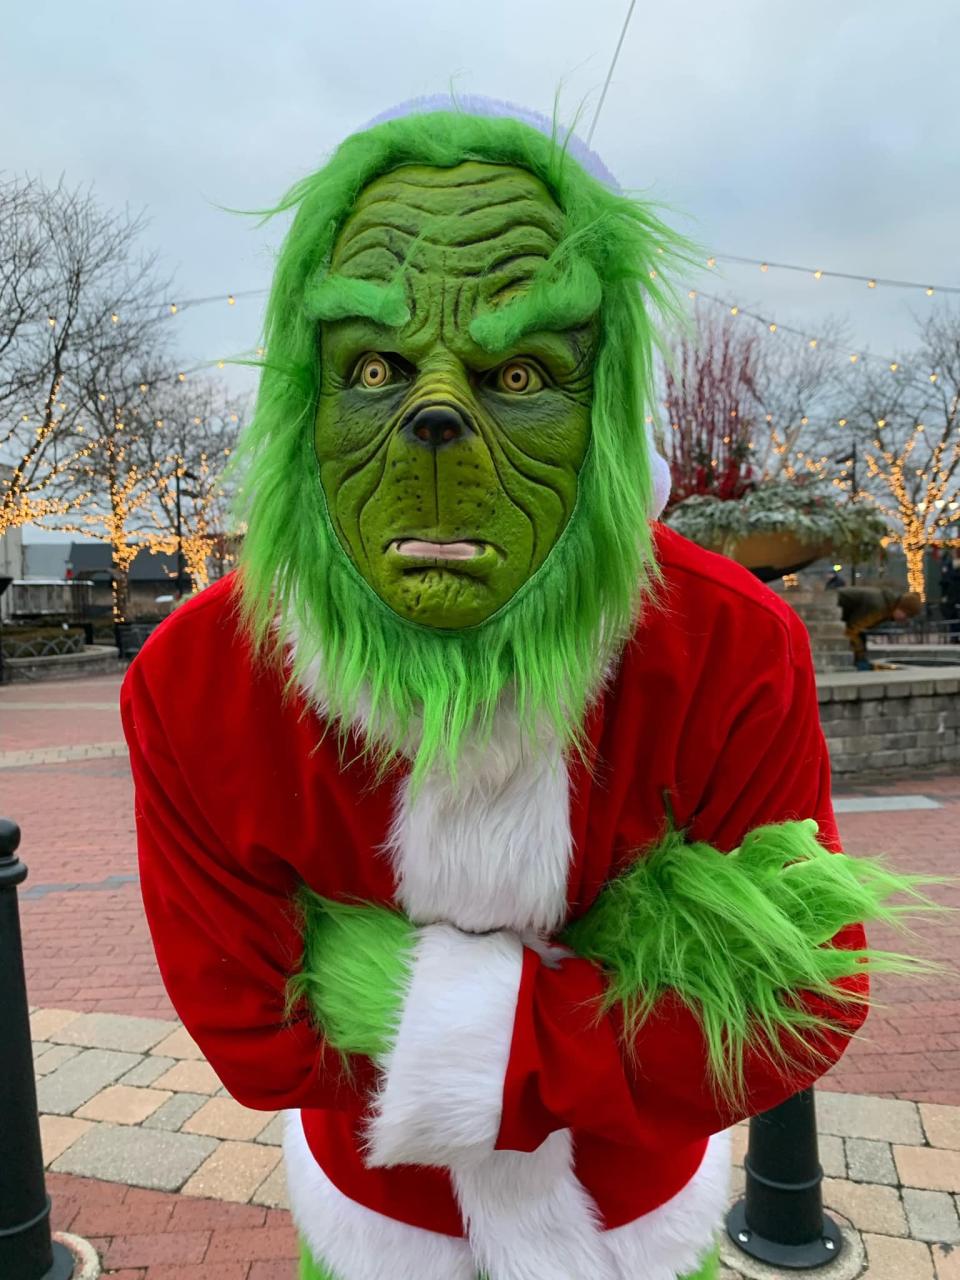 The Grinch and other characters will be in downtown Northville for A Holiday to Remember.